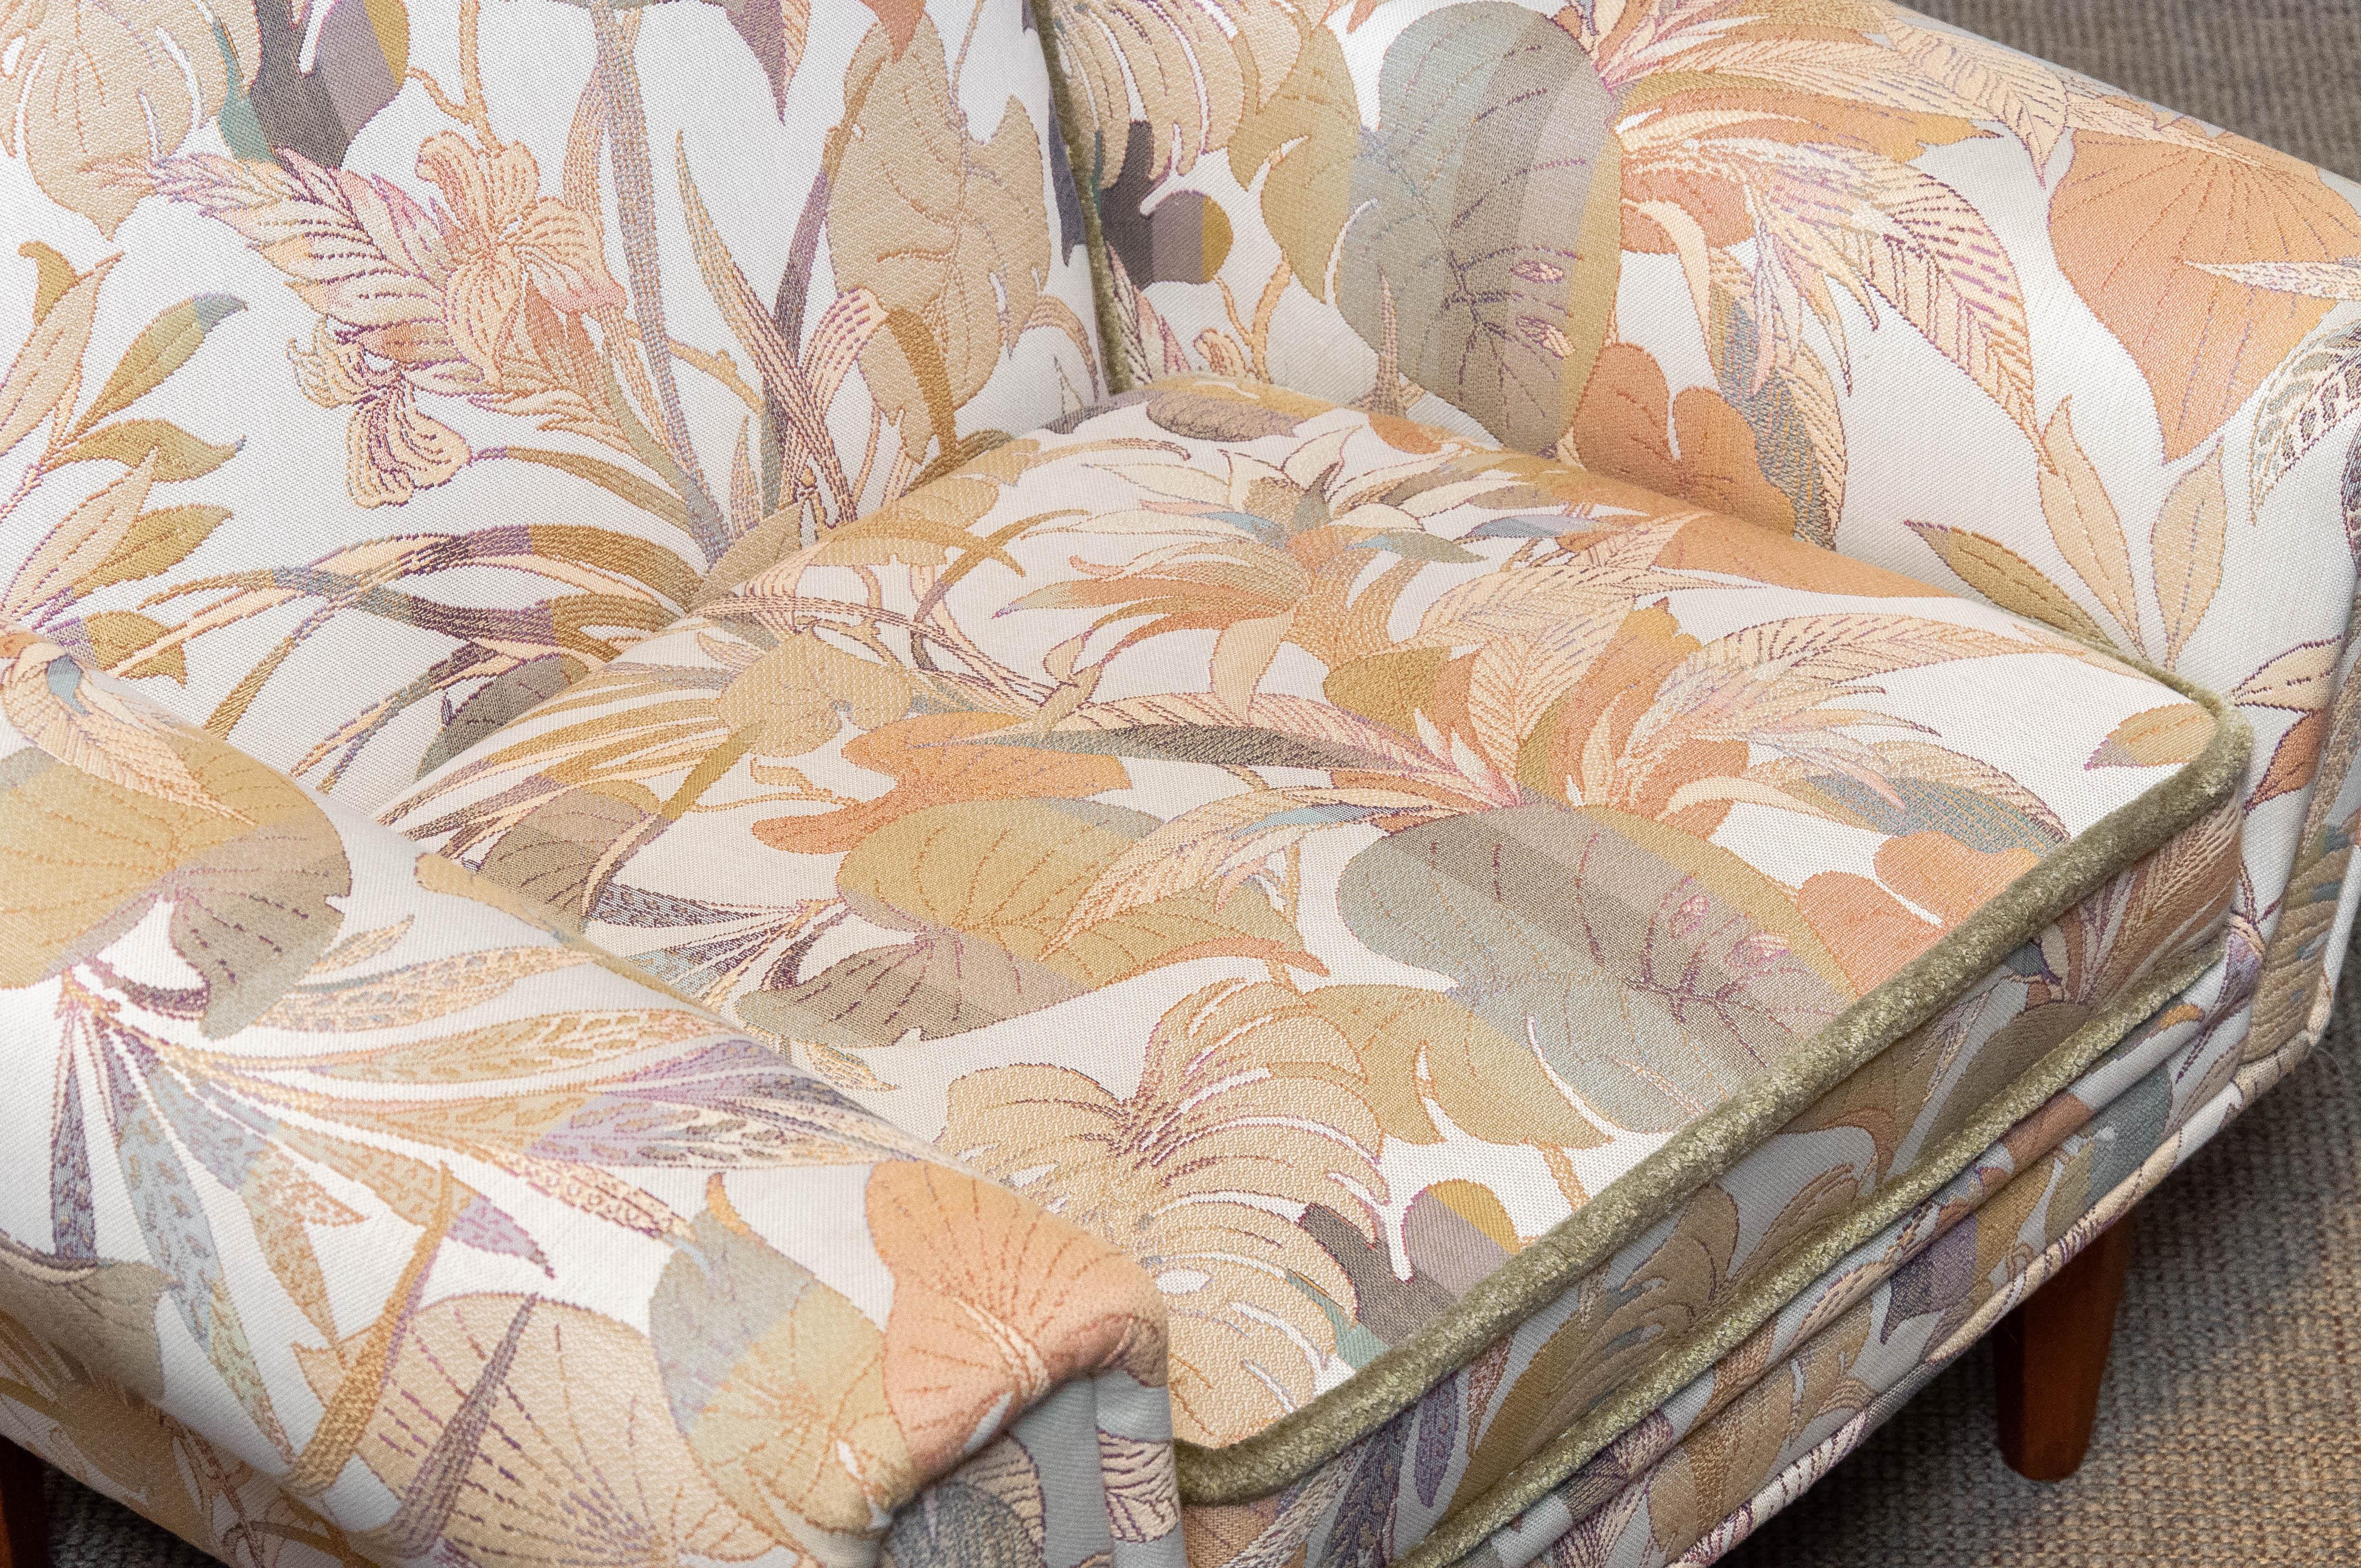 Danish Low Back Lounge Chair Upholstered Floral Jacquard Fabric from the 1970's For Sale 7